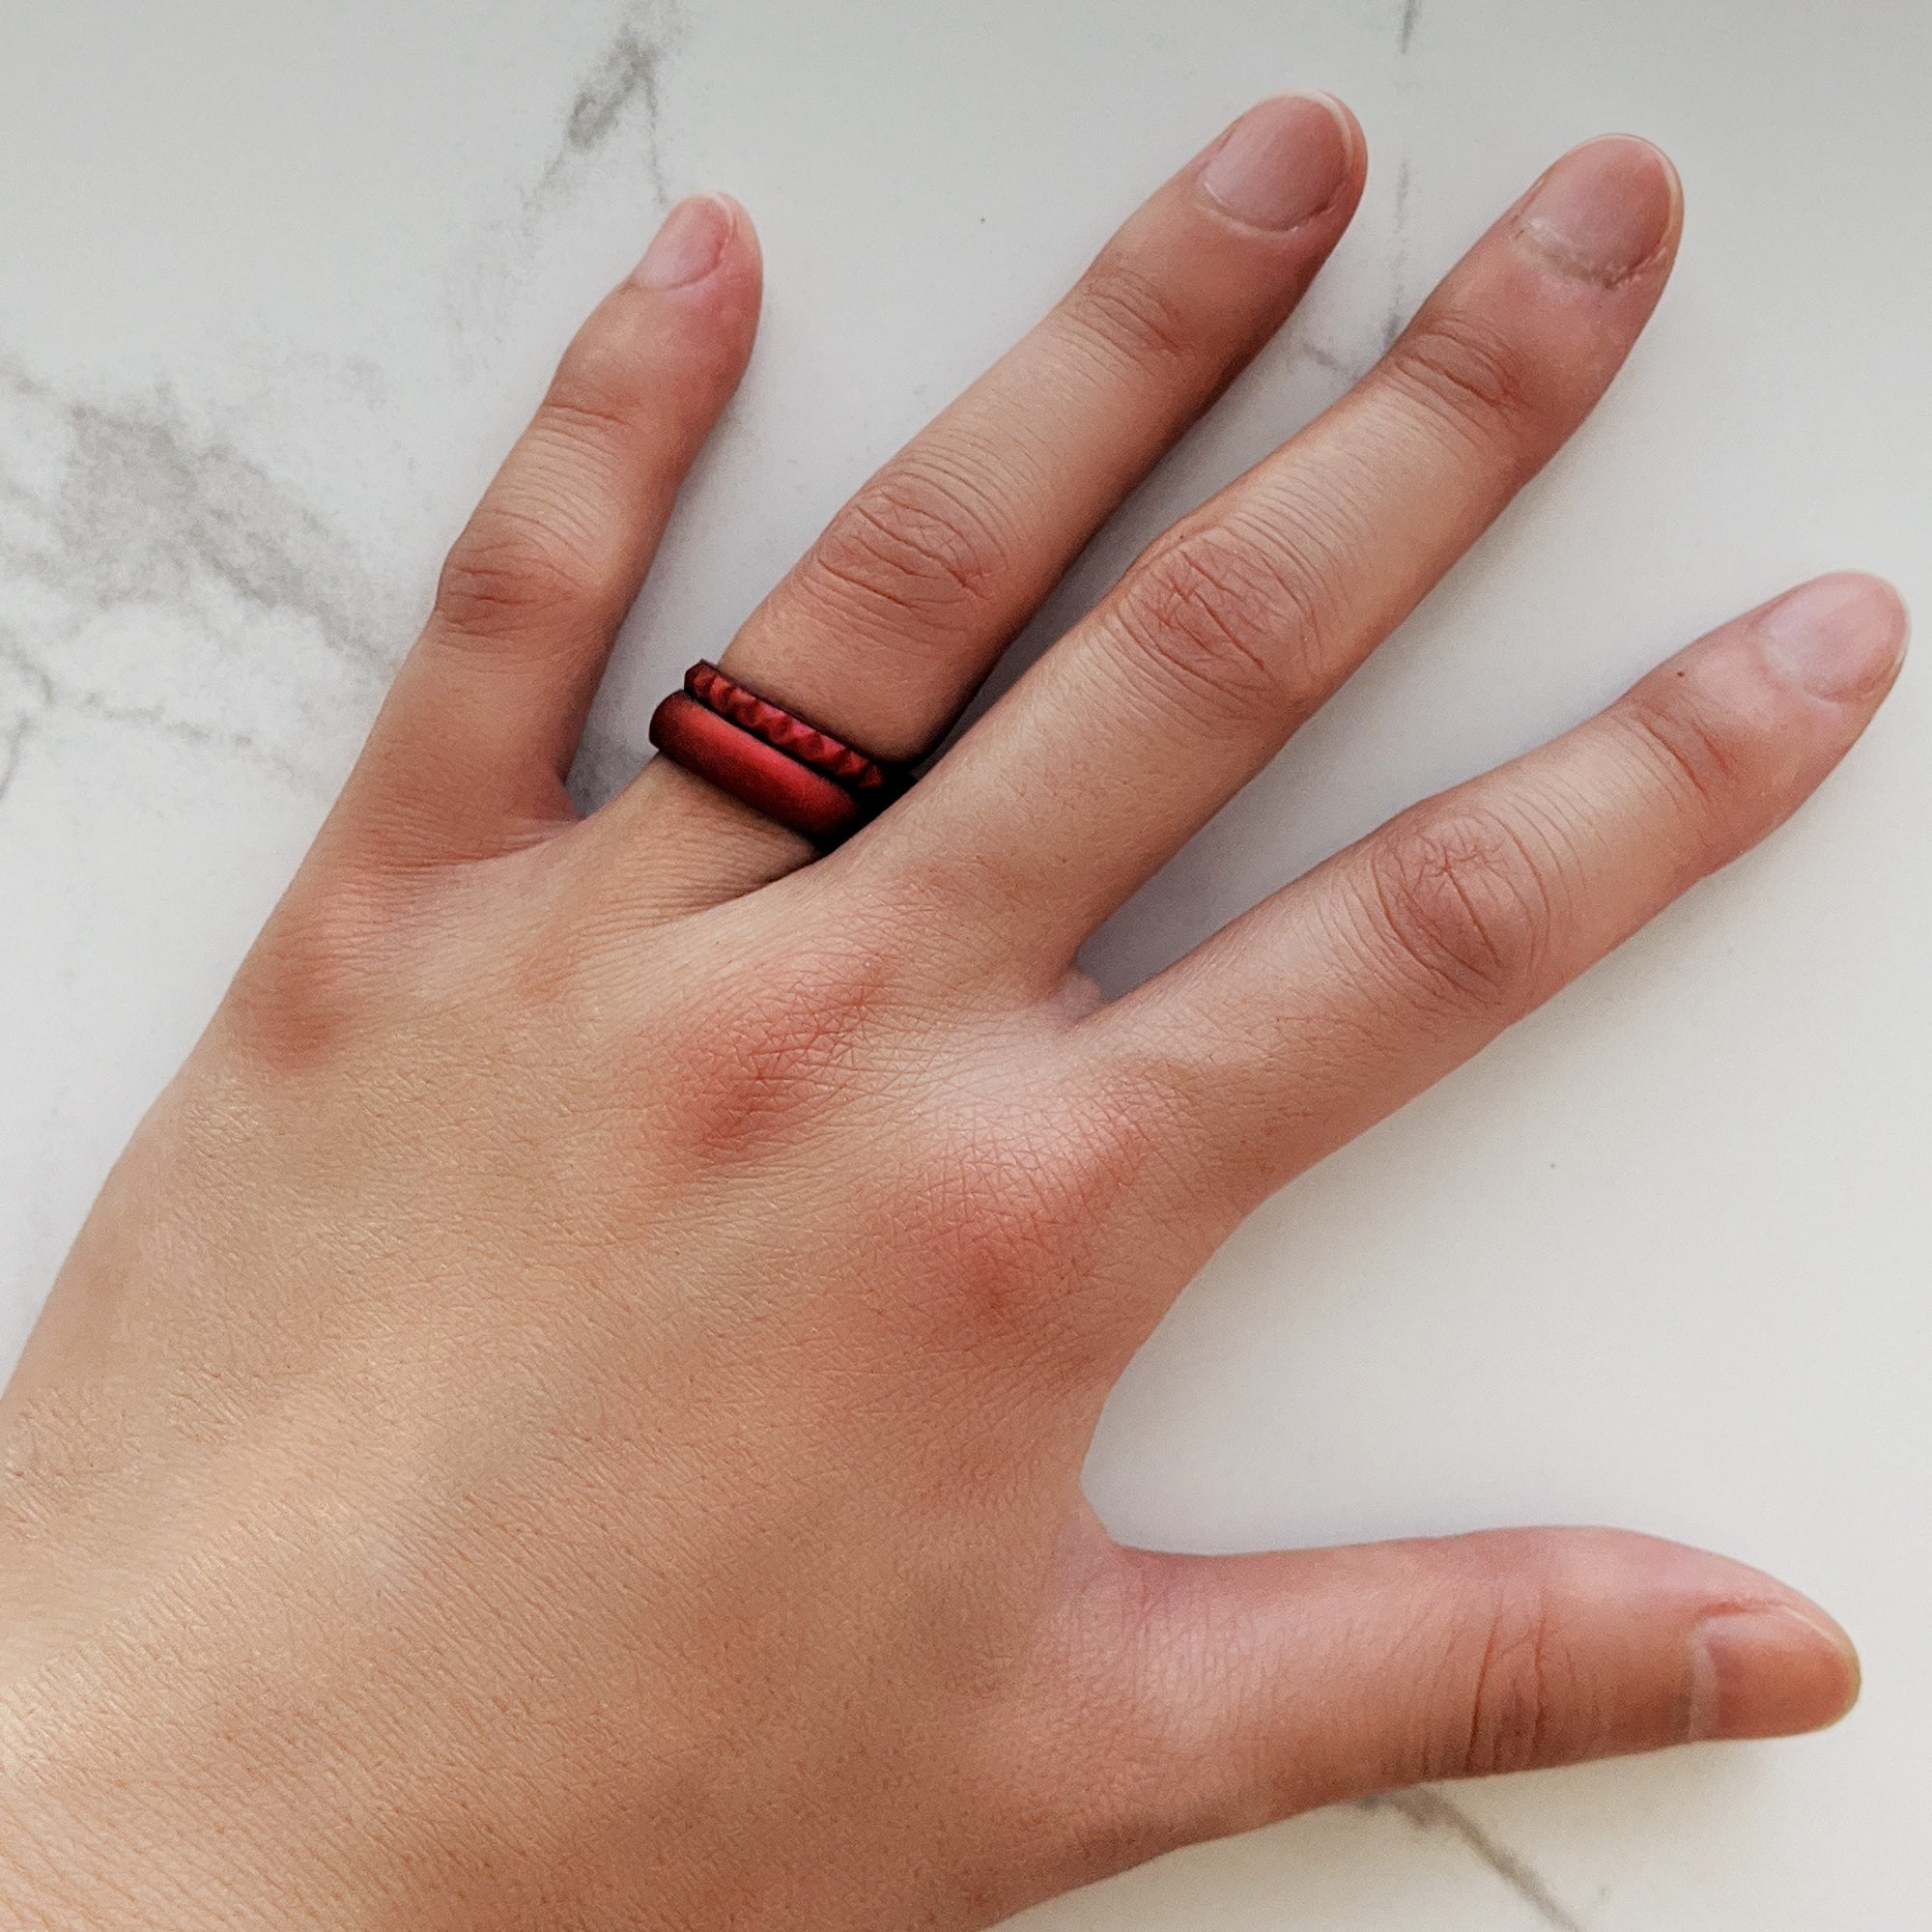 Metallic Red Garnet Pyramid Stackable Slim Thin Silicone Ring for Women - Knot Theory